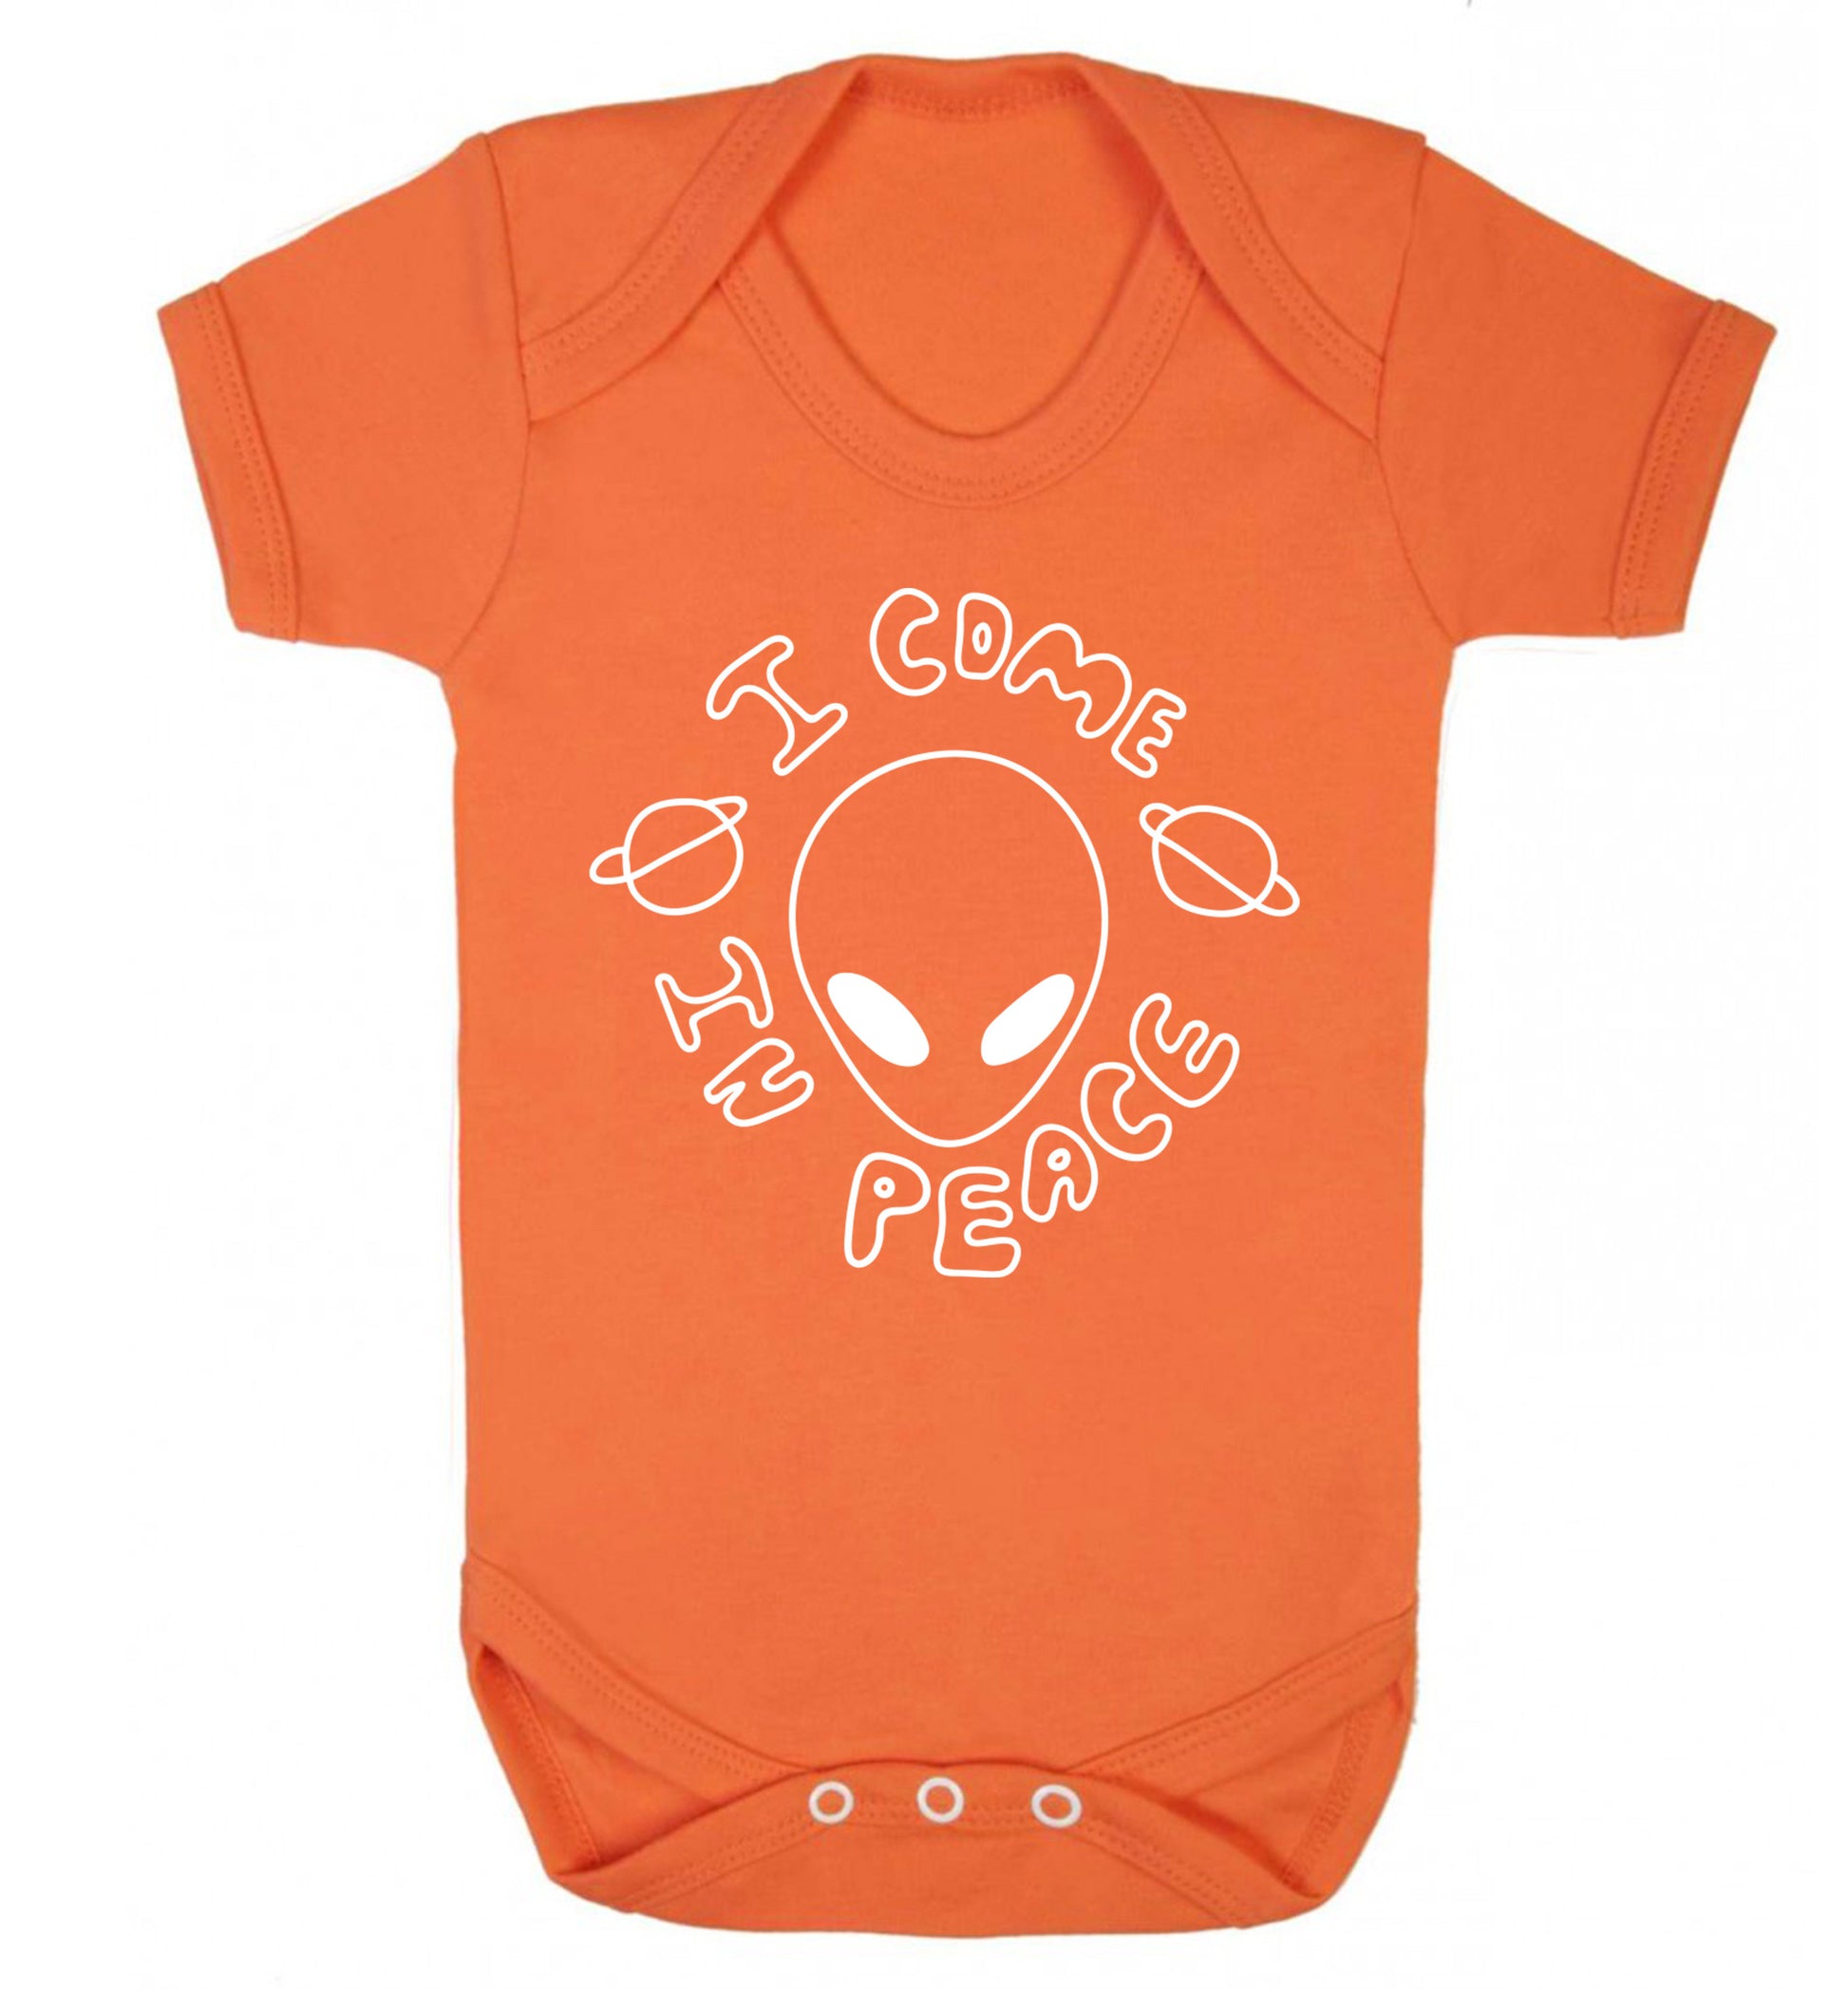 I come in peace Baby Vest orange 18-24 months